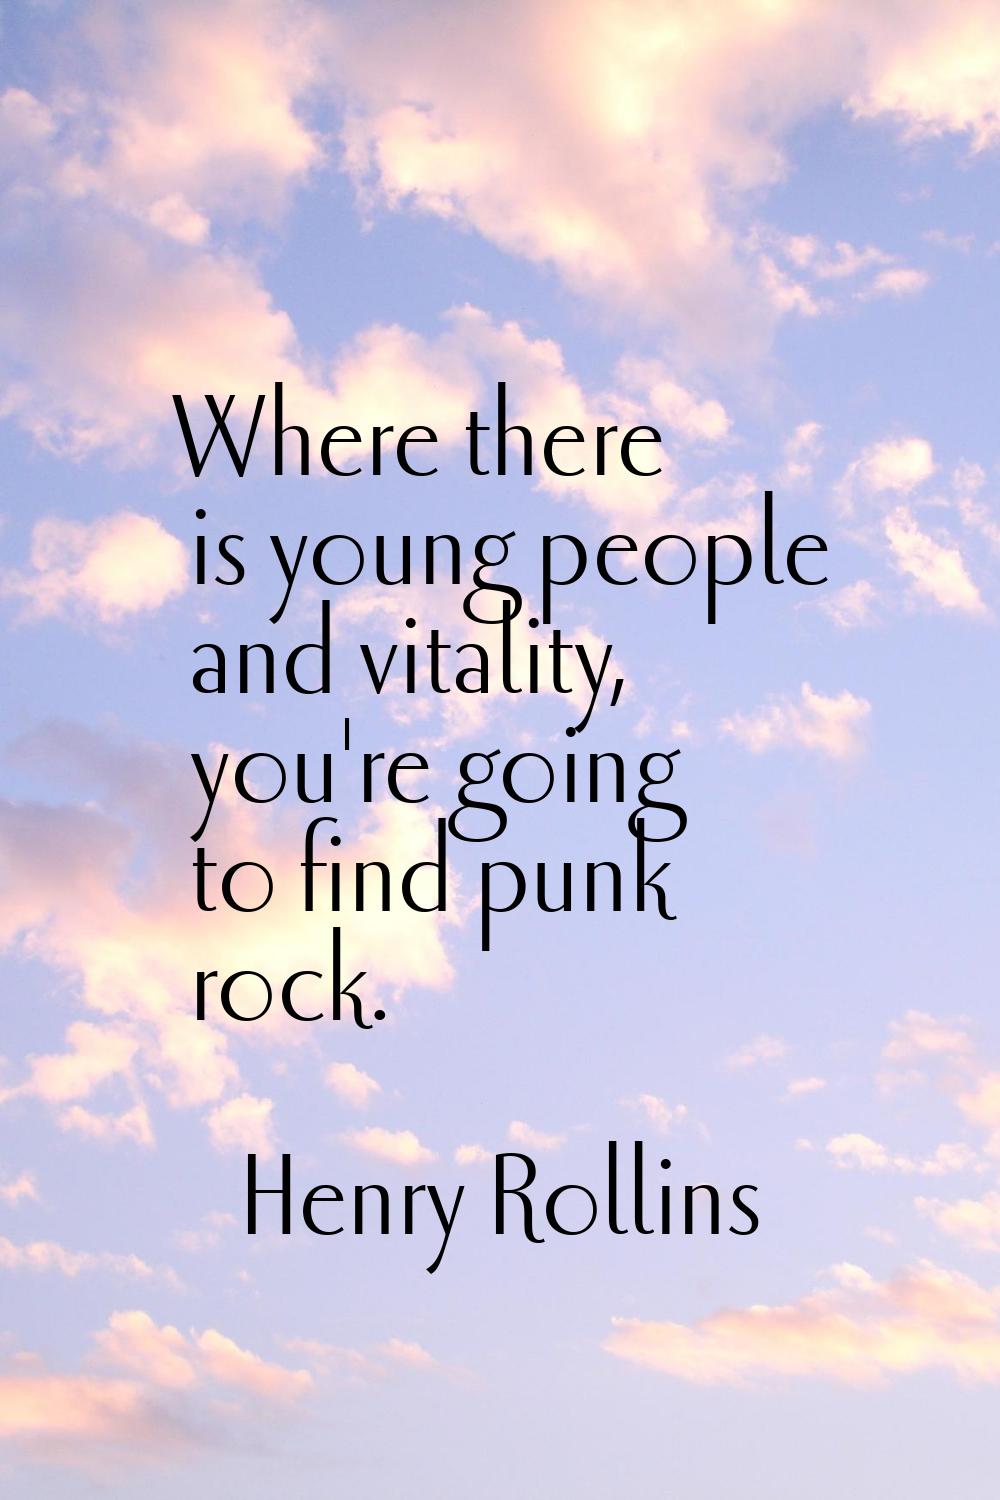 Where there is young people and vitality, you're going to find punk rock.